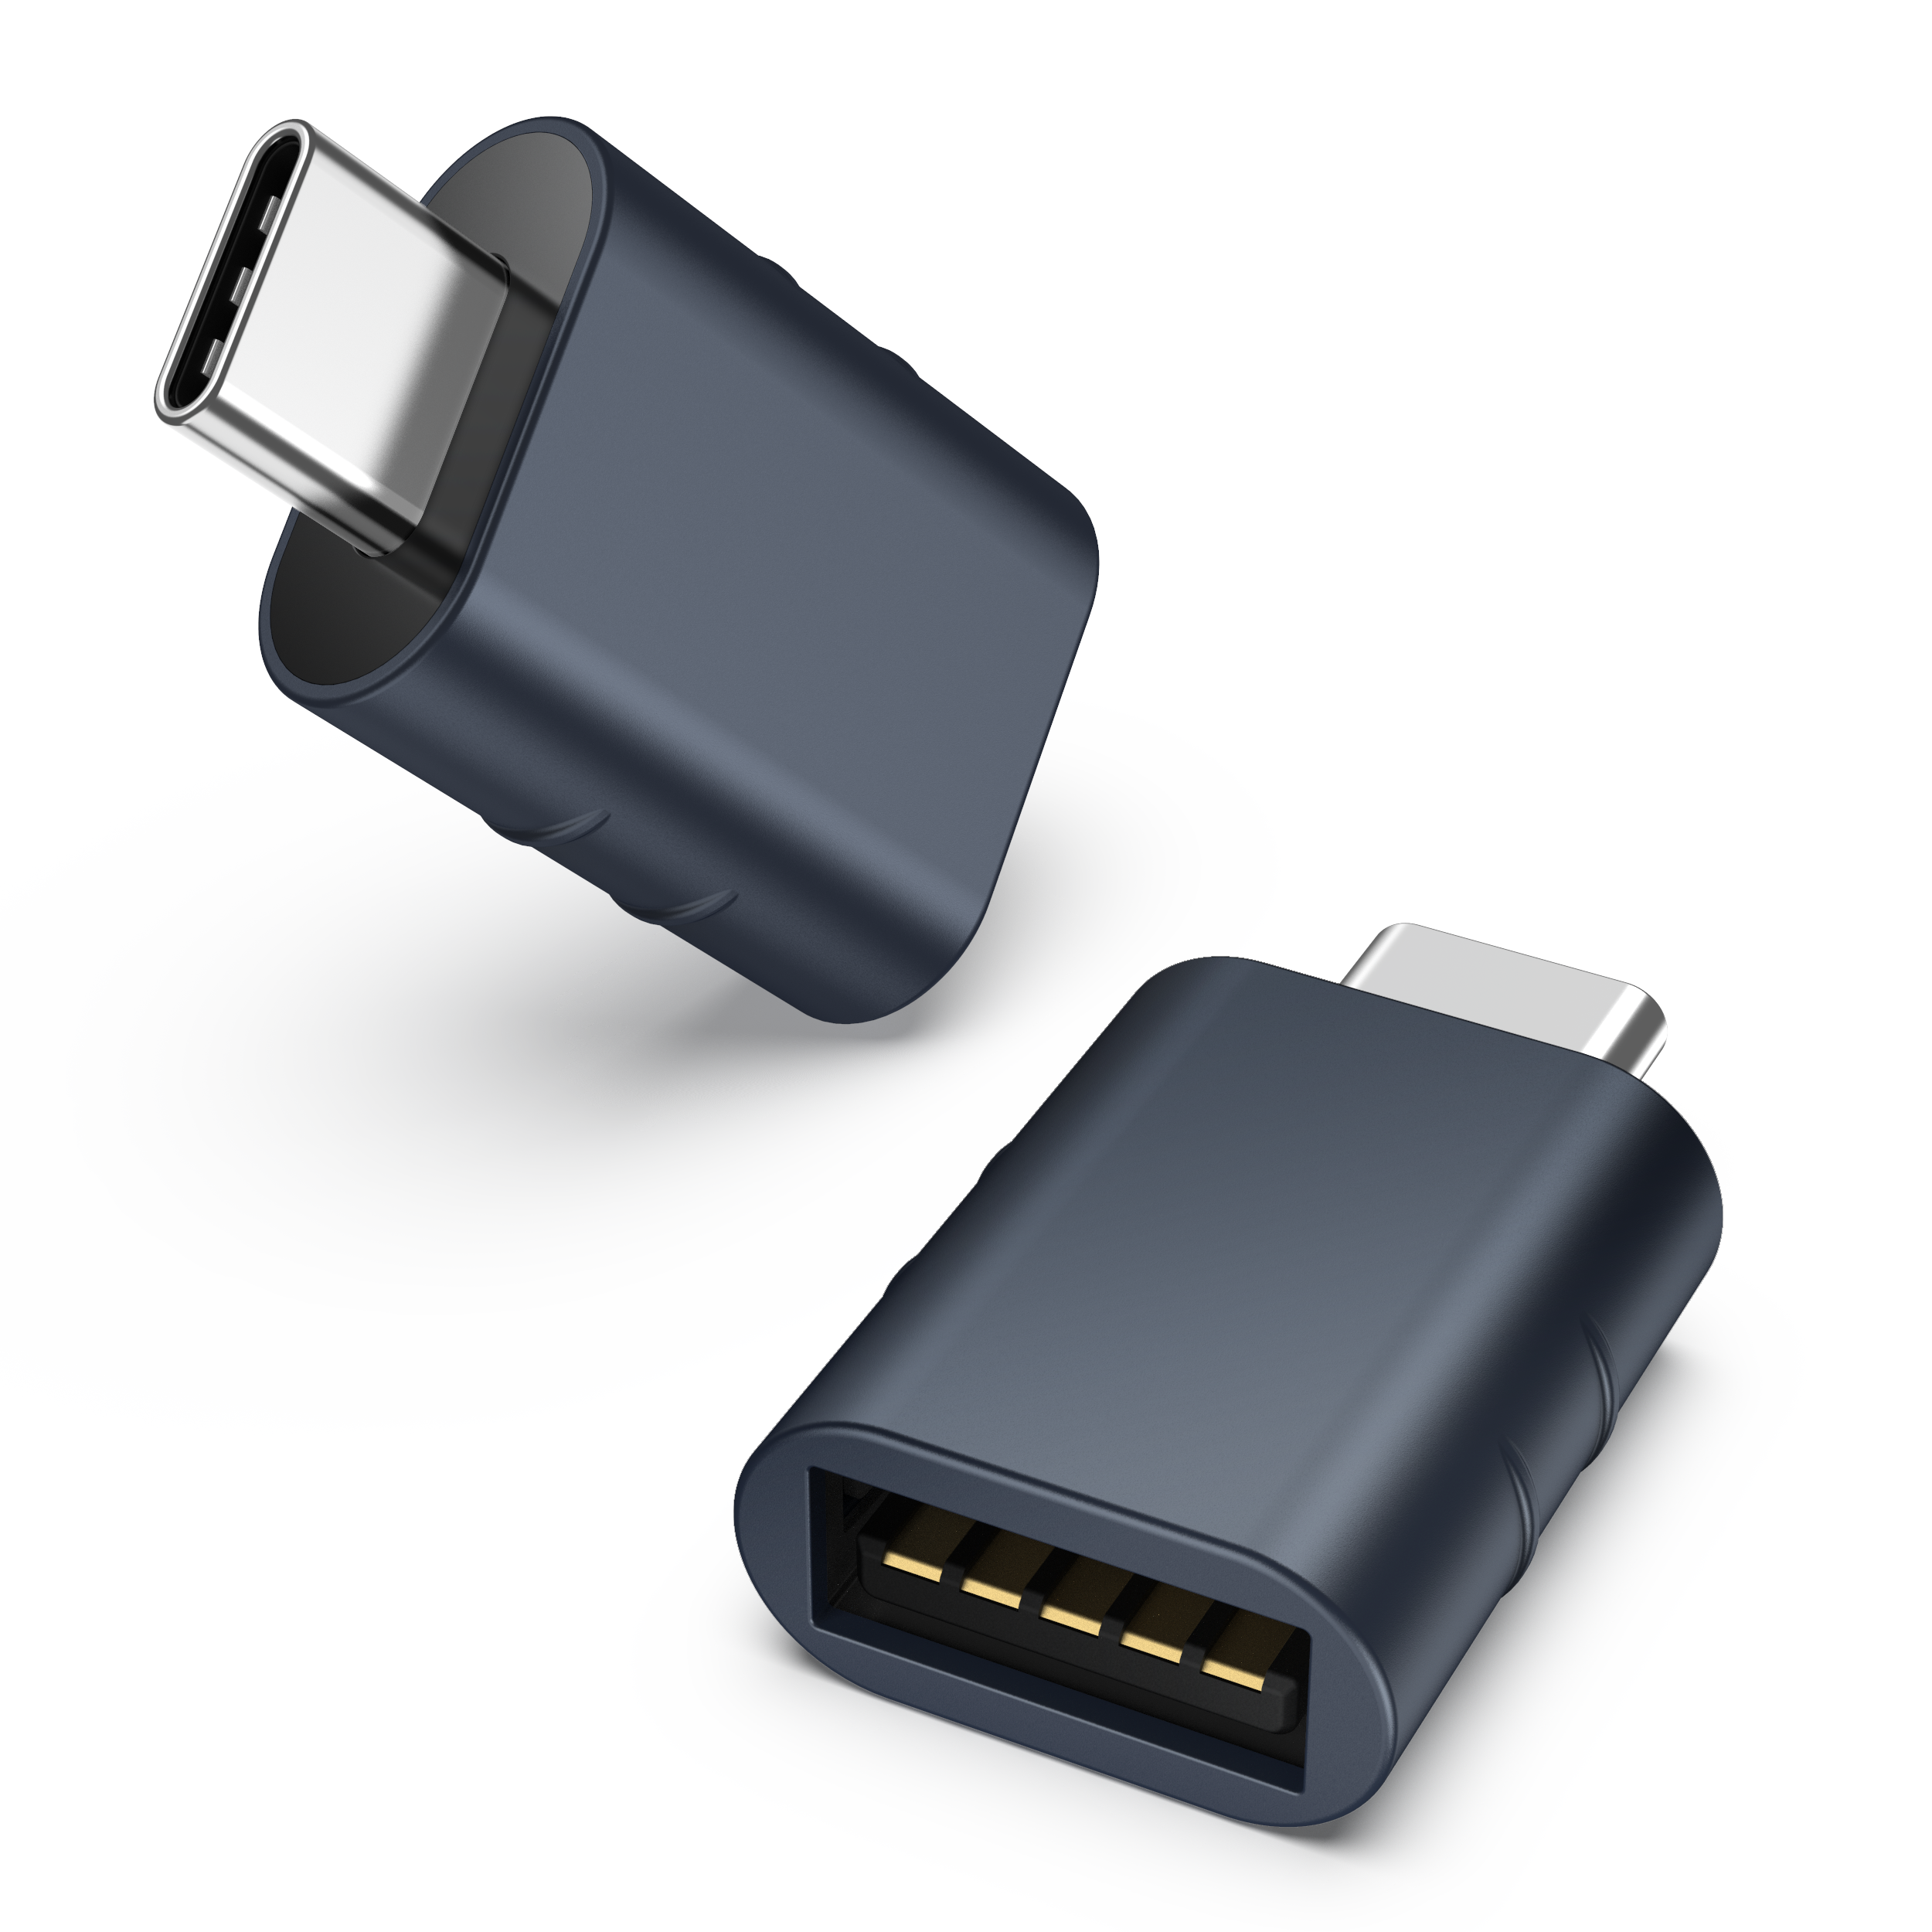 USB 2.0 Adapter - USB Micro Male to USB C Male - 3 Pack